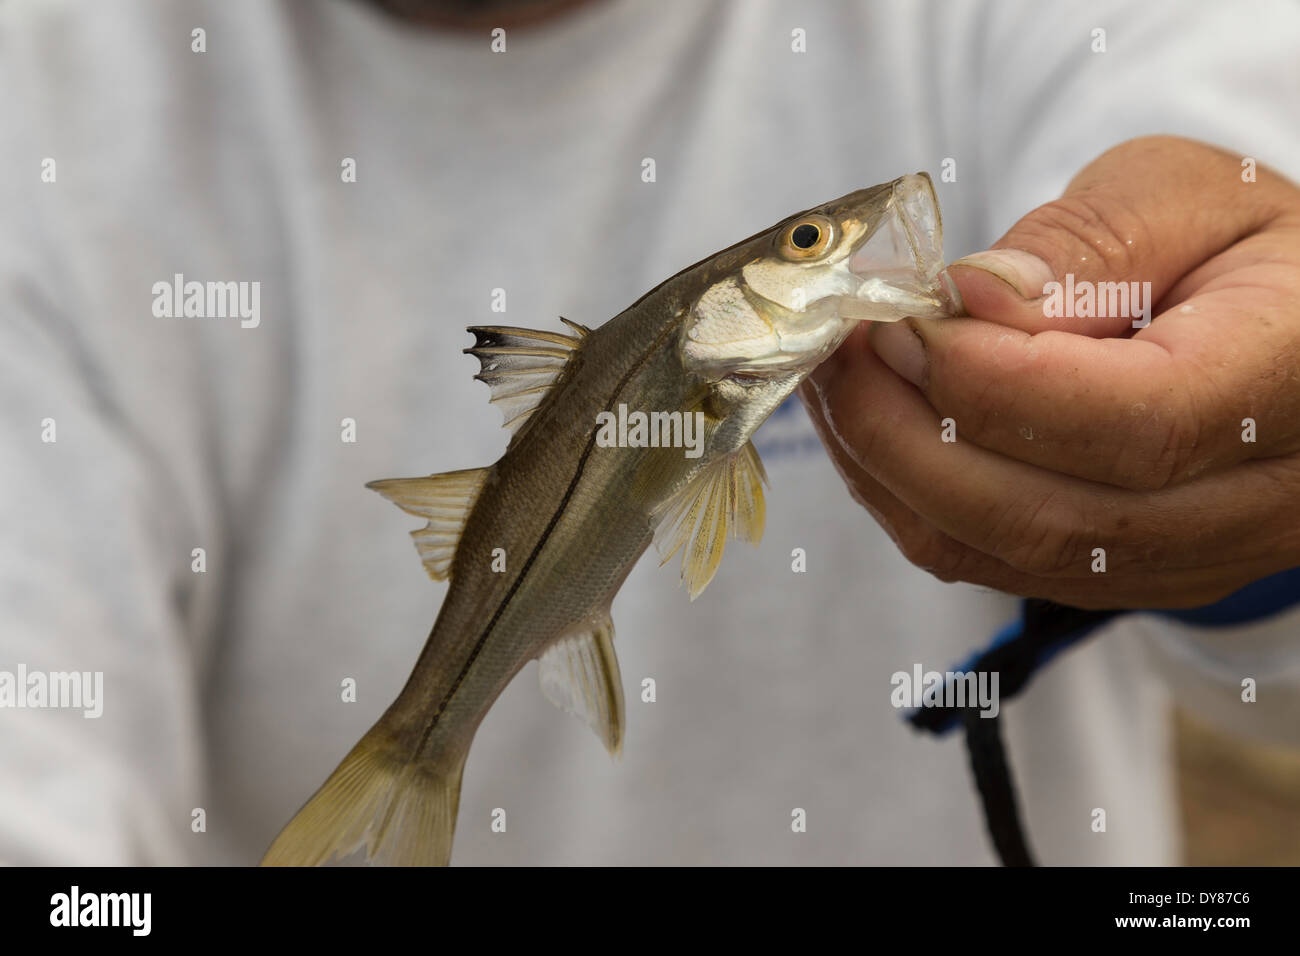 Angler Holding a Young Snook Fish's Mouth, FL, USA Stock Photo